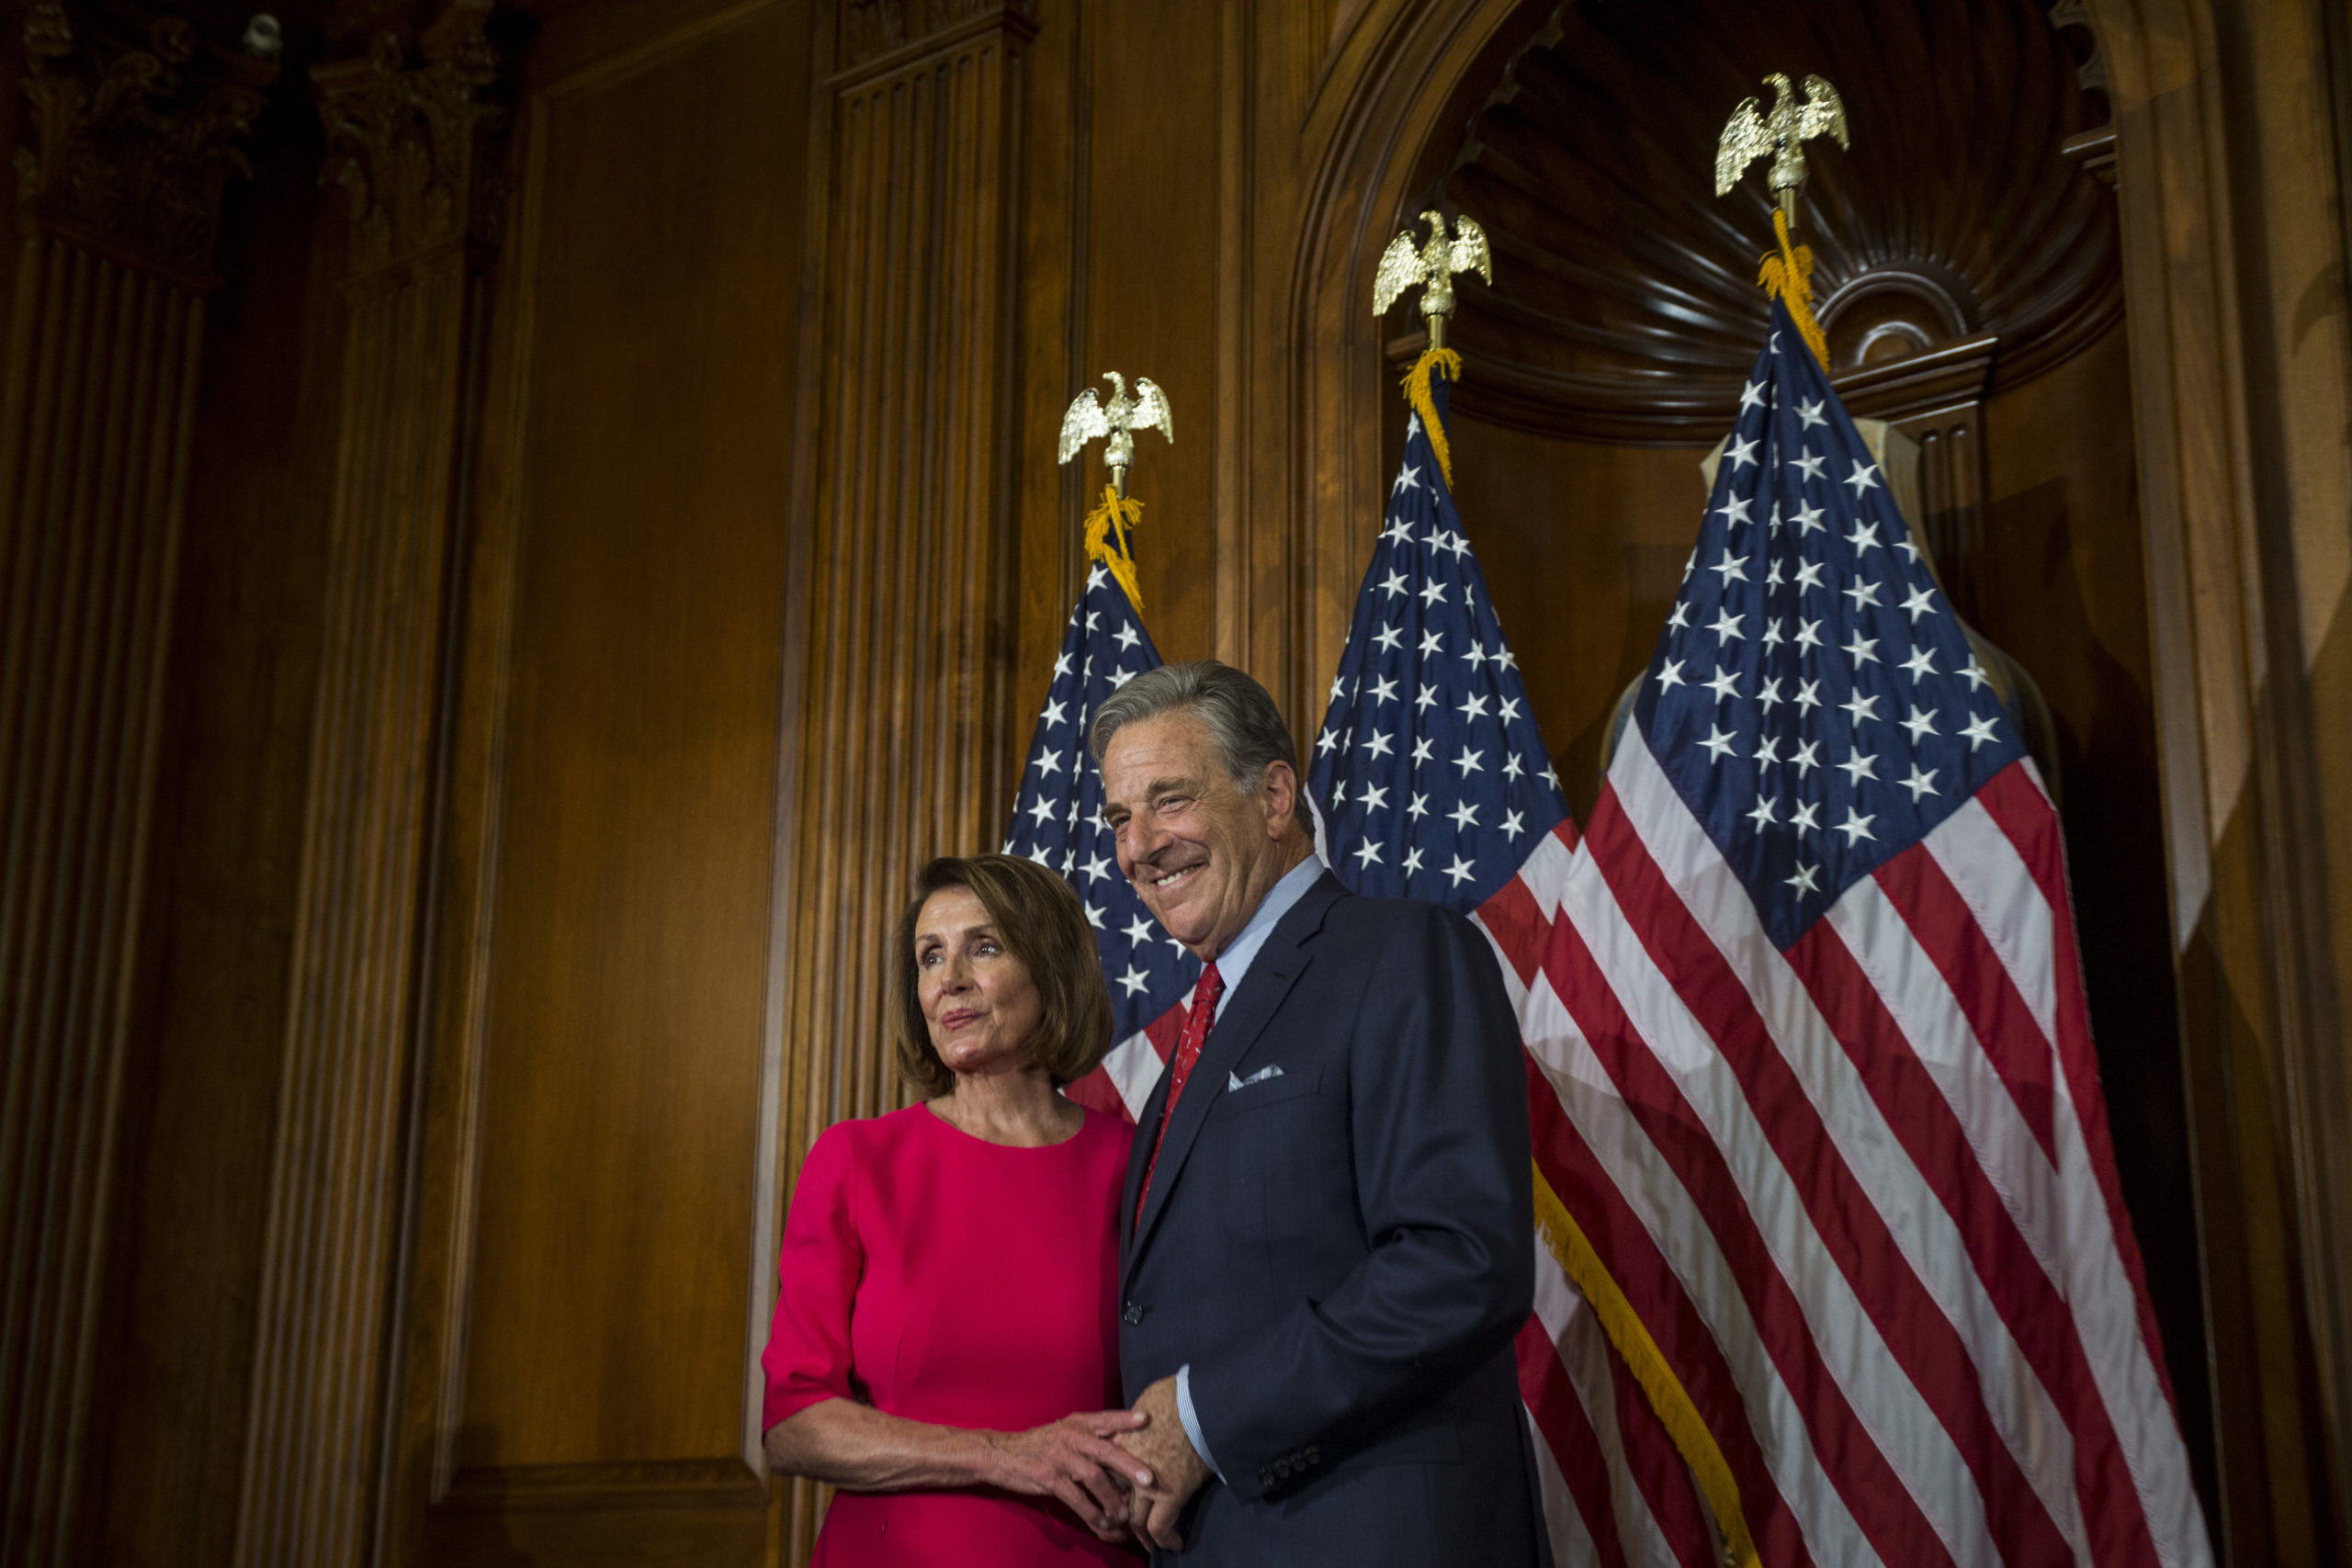 WASHINGTON, DC - JANUARY 03: House Speaker Nancy Pelosi is pictured with her husband, Paul Pelosi, on Capitol Hill on January 3, 2019 in Washington, DC. Under the cloud of a partial federal government shutdown, Pelosi reclaimed her former title as speaker and her fellow Democrats took control of the House of Representatives for the second time in eight years. (Photo by Zach Gibson/Getty Images)